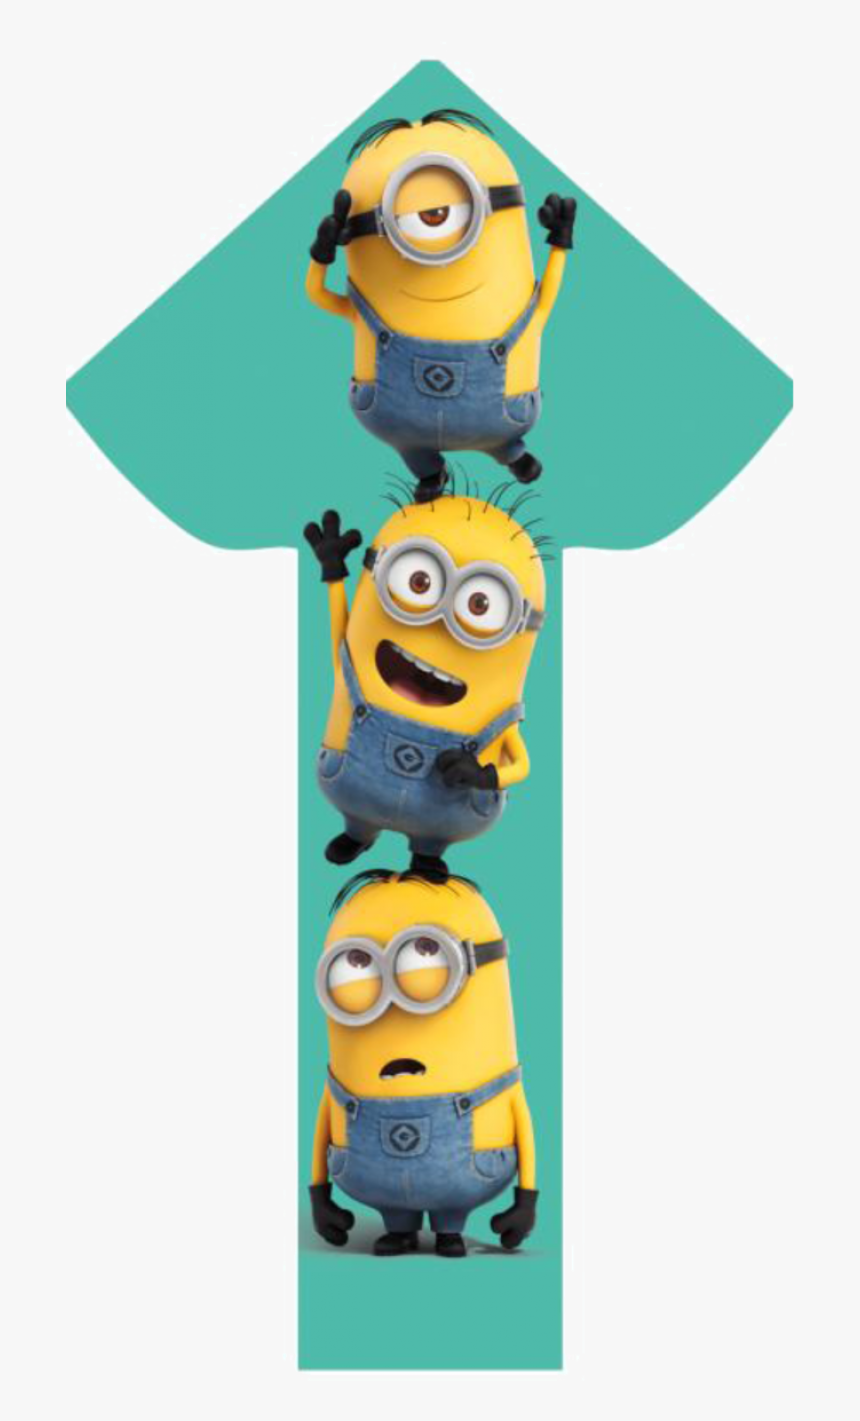 Image Of Minions - 3 Minions, HD Png Download, Free Download